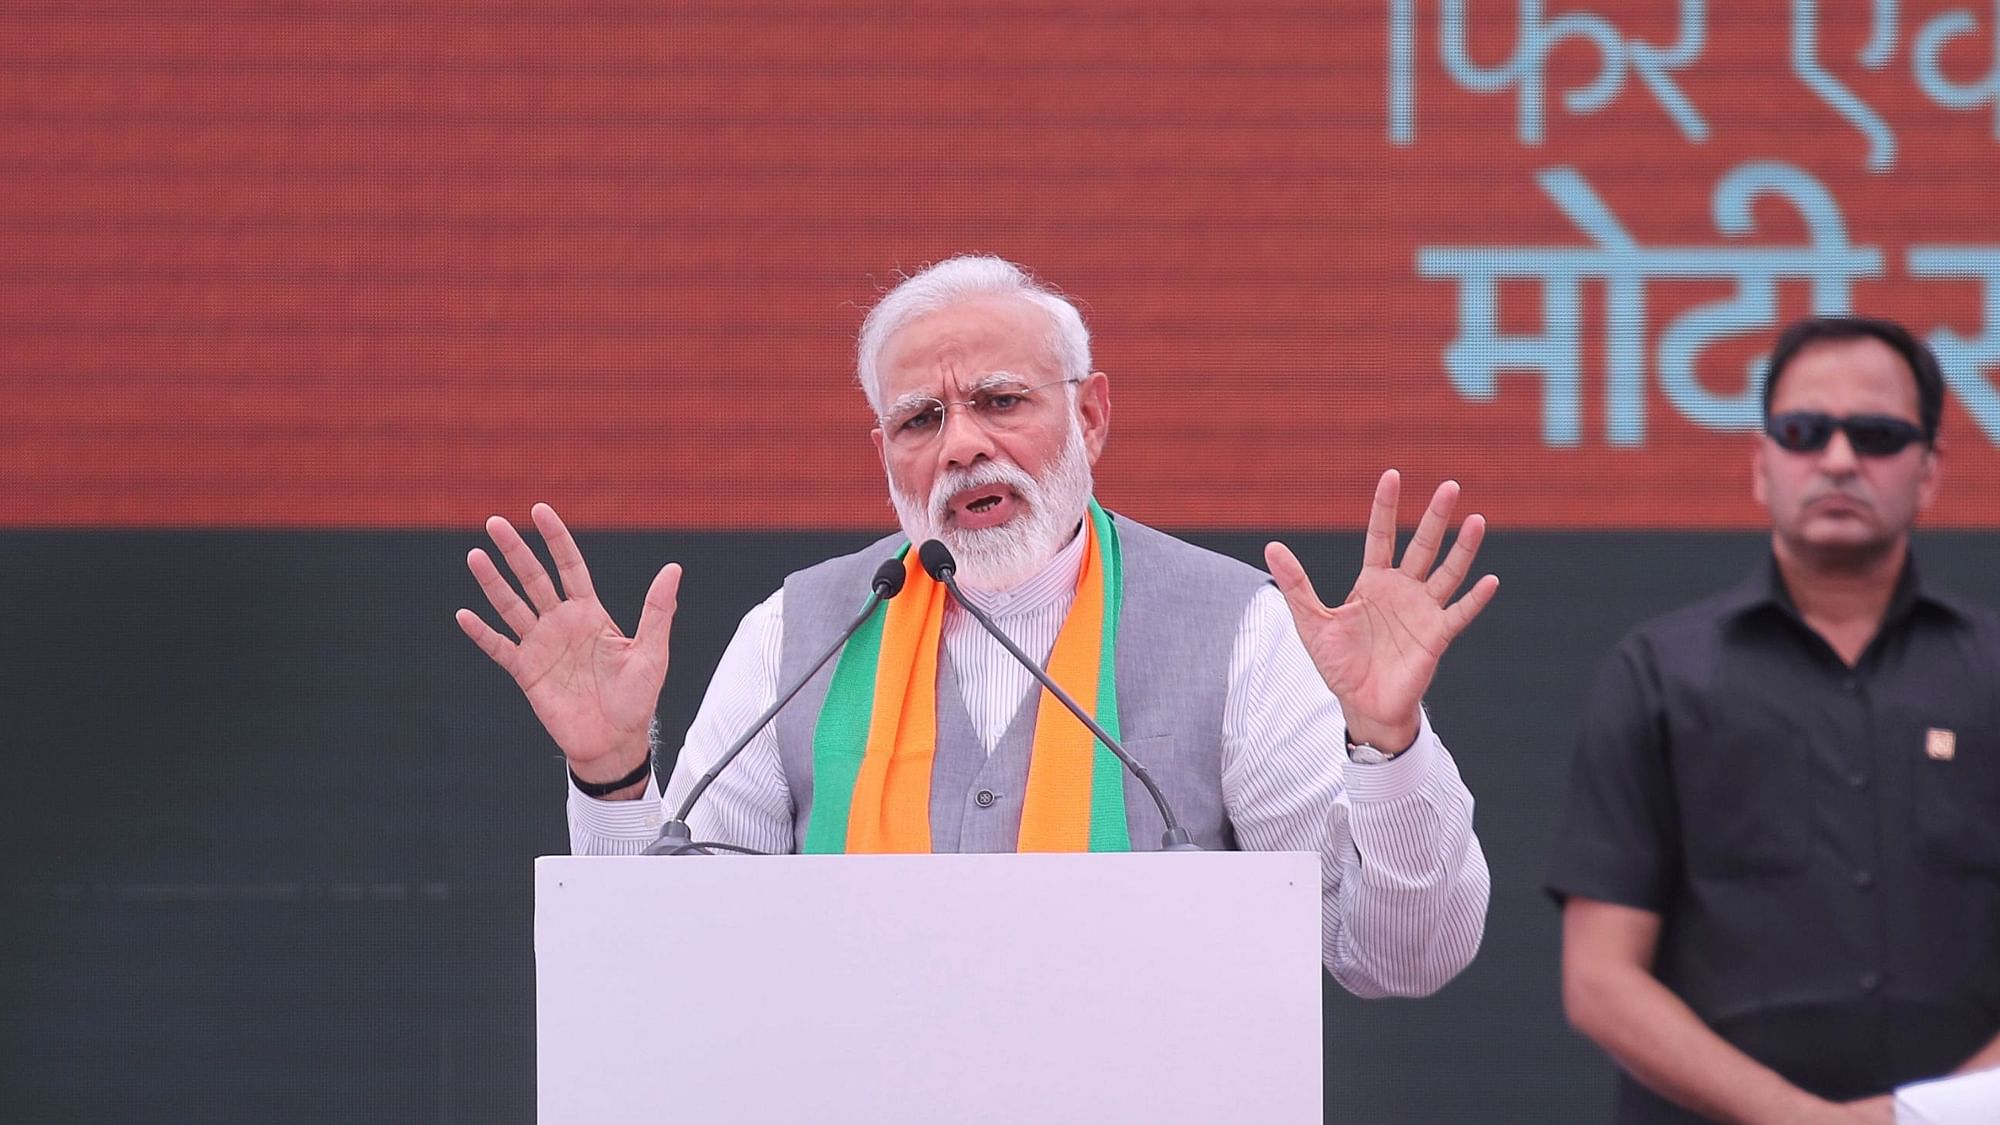 Prime Minister Narendra Modi reminded his message the need to come together as a nation to fight the battle against coronavirus.